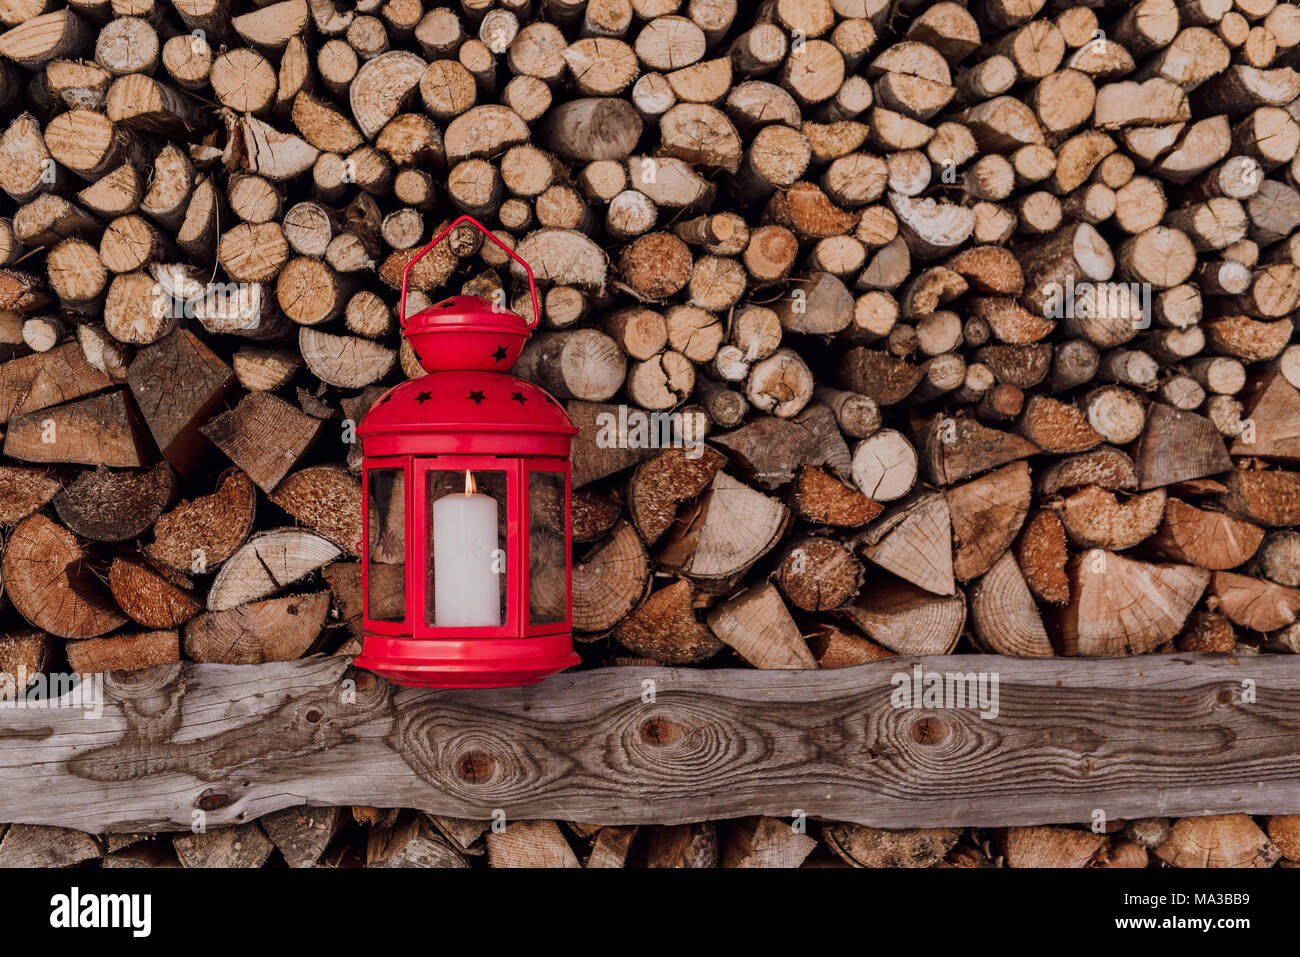 Red lantern in front of piled firewood Stock Photo